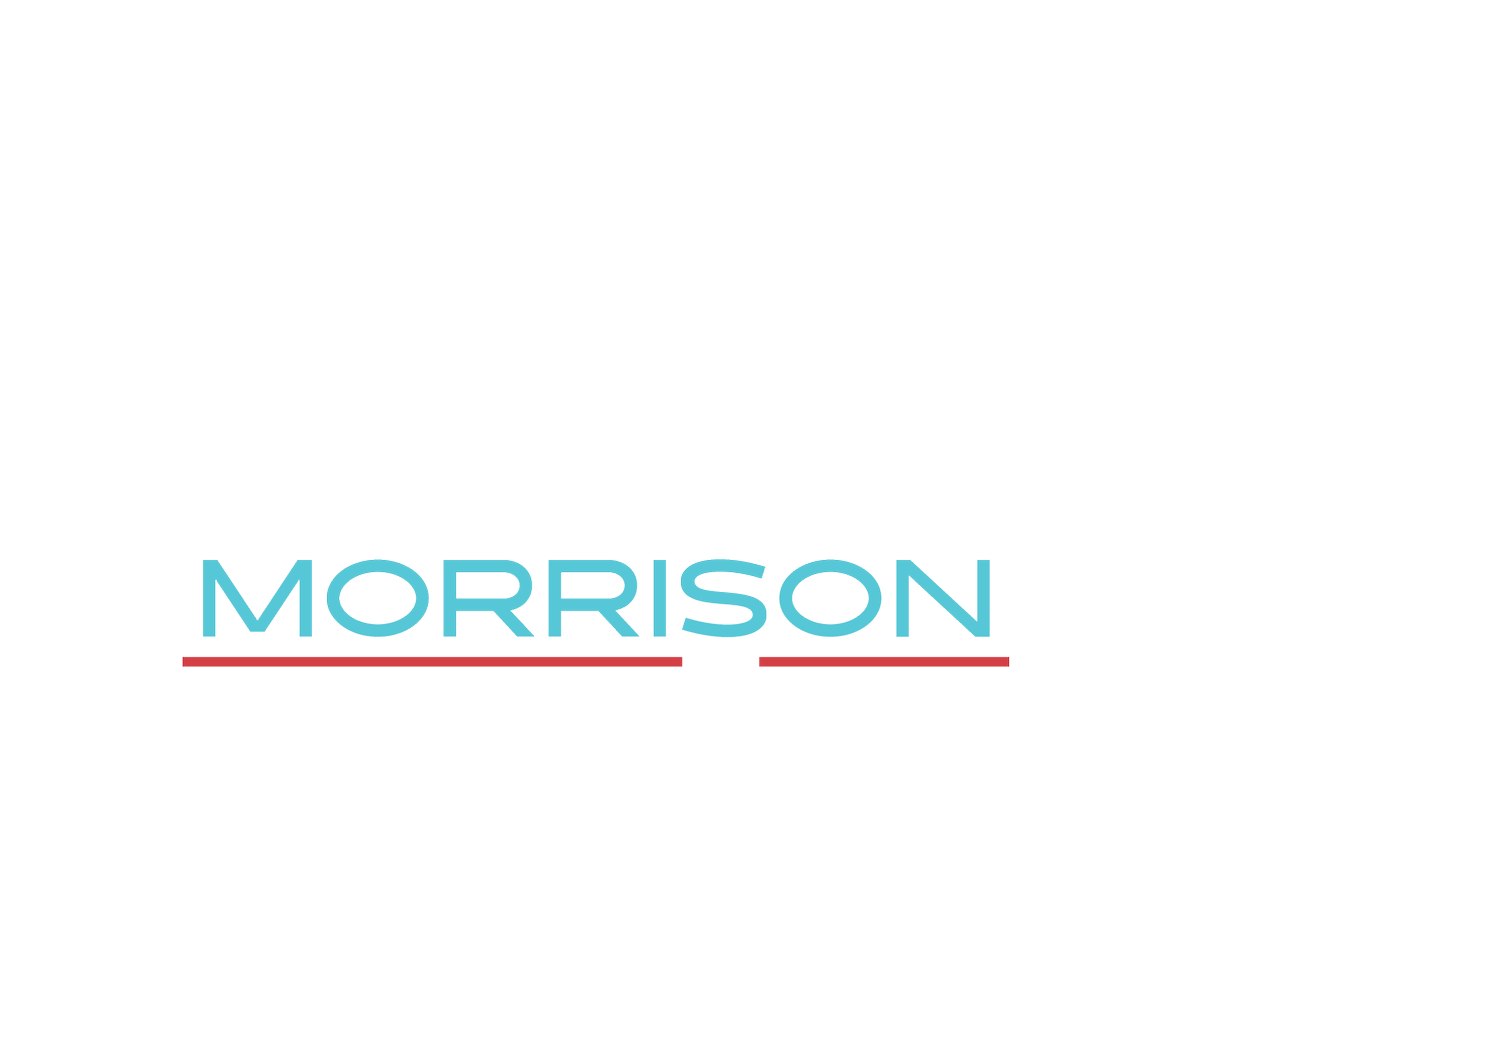 Kelly Morrison for Congress